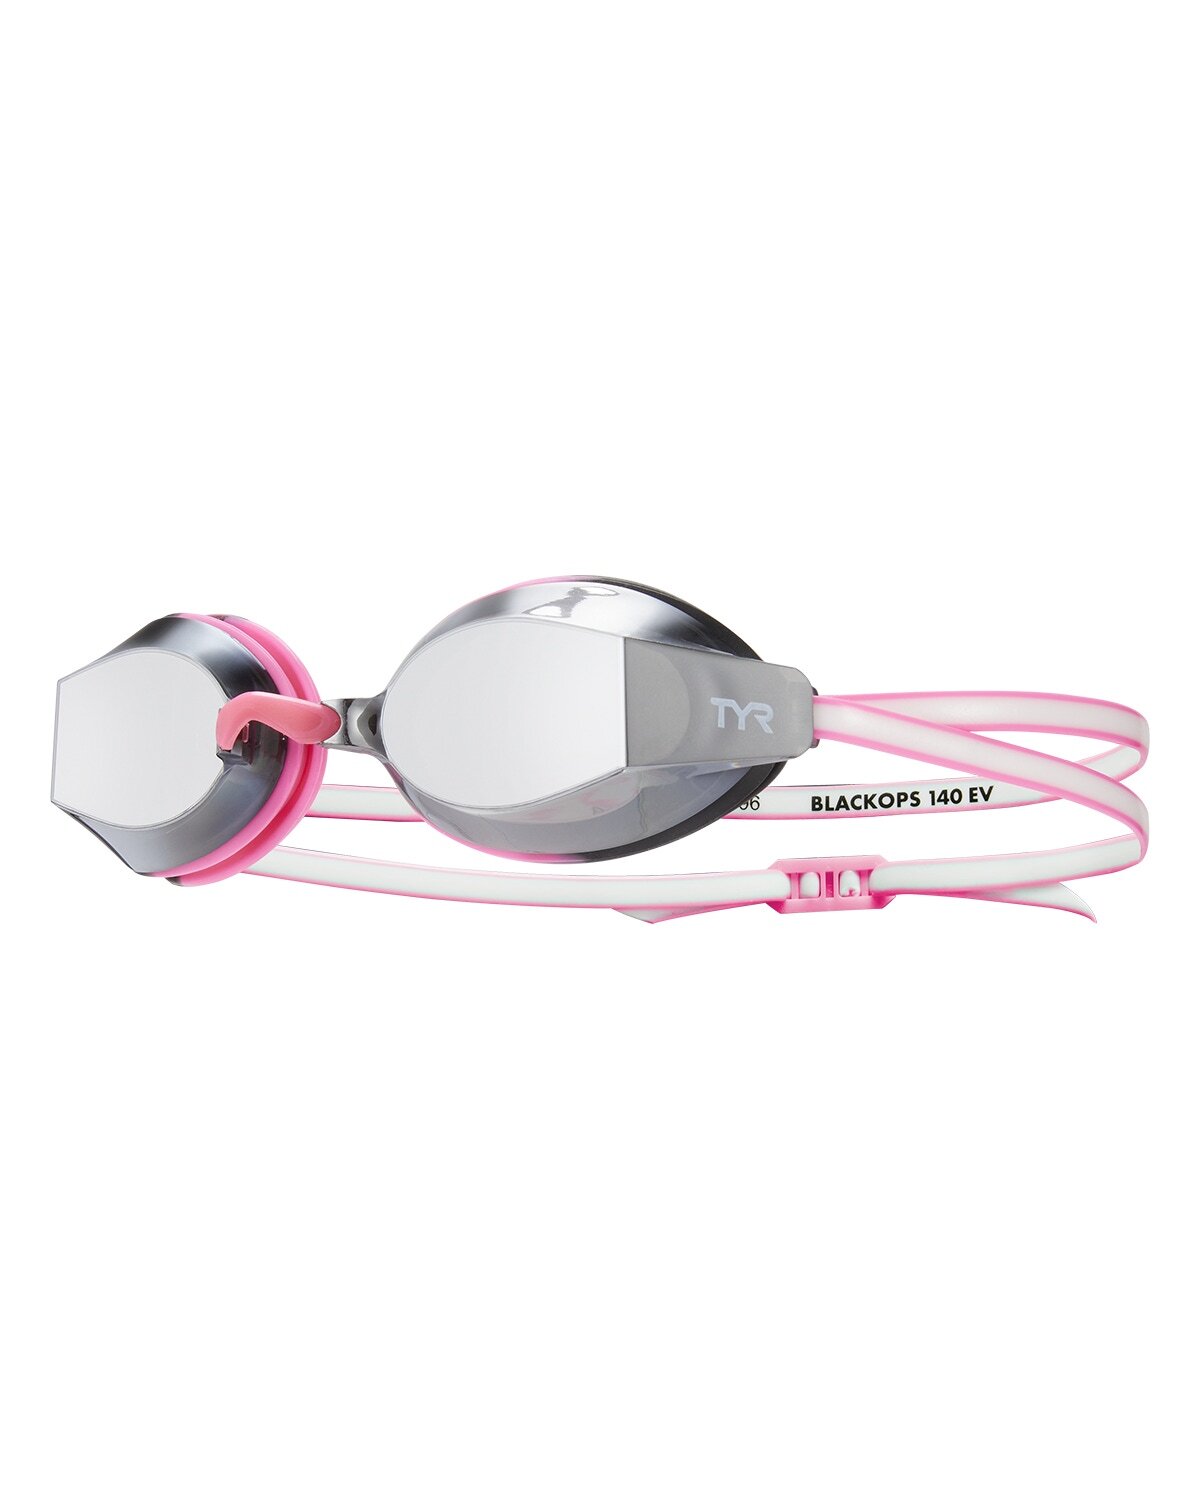 TYR Silver/Pink Blackops 140 EV Mirrored Women's Fit Goggle